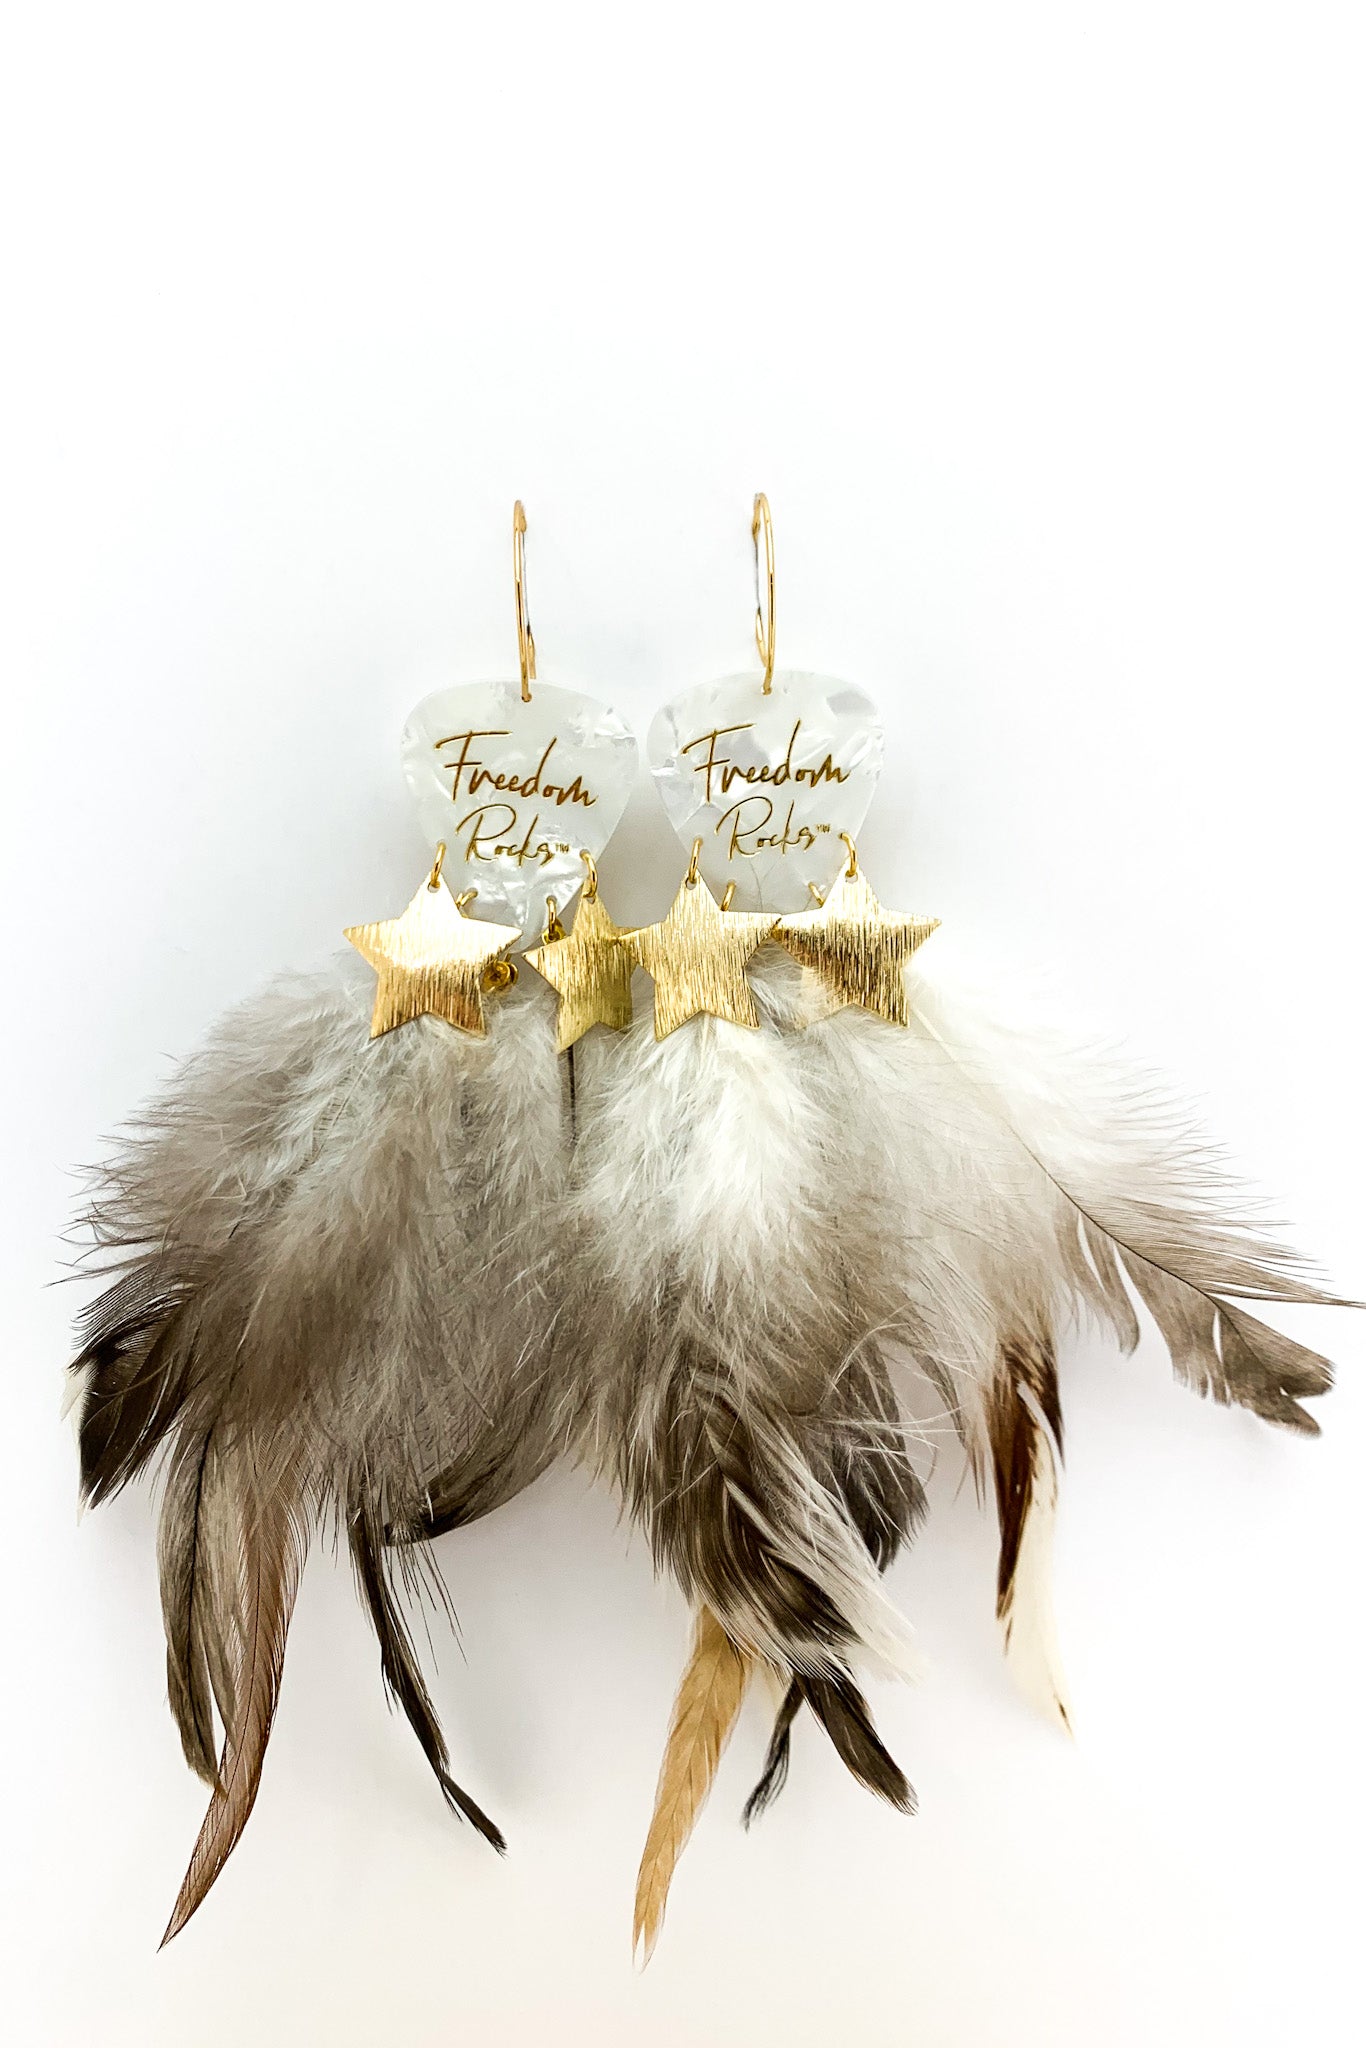 Freedom Rocks White Pearl Gold Star Feather Guitar Pick Earrings